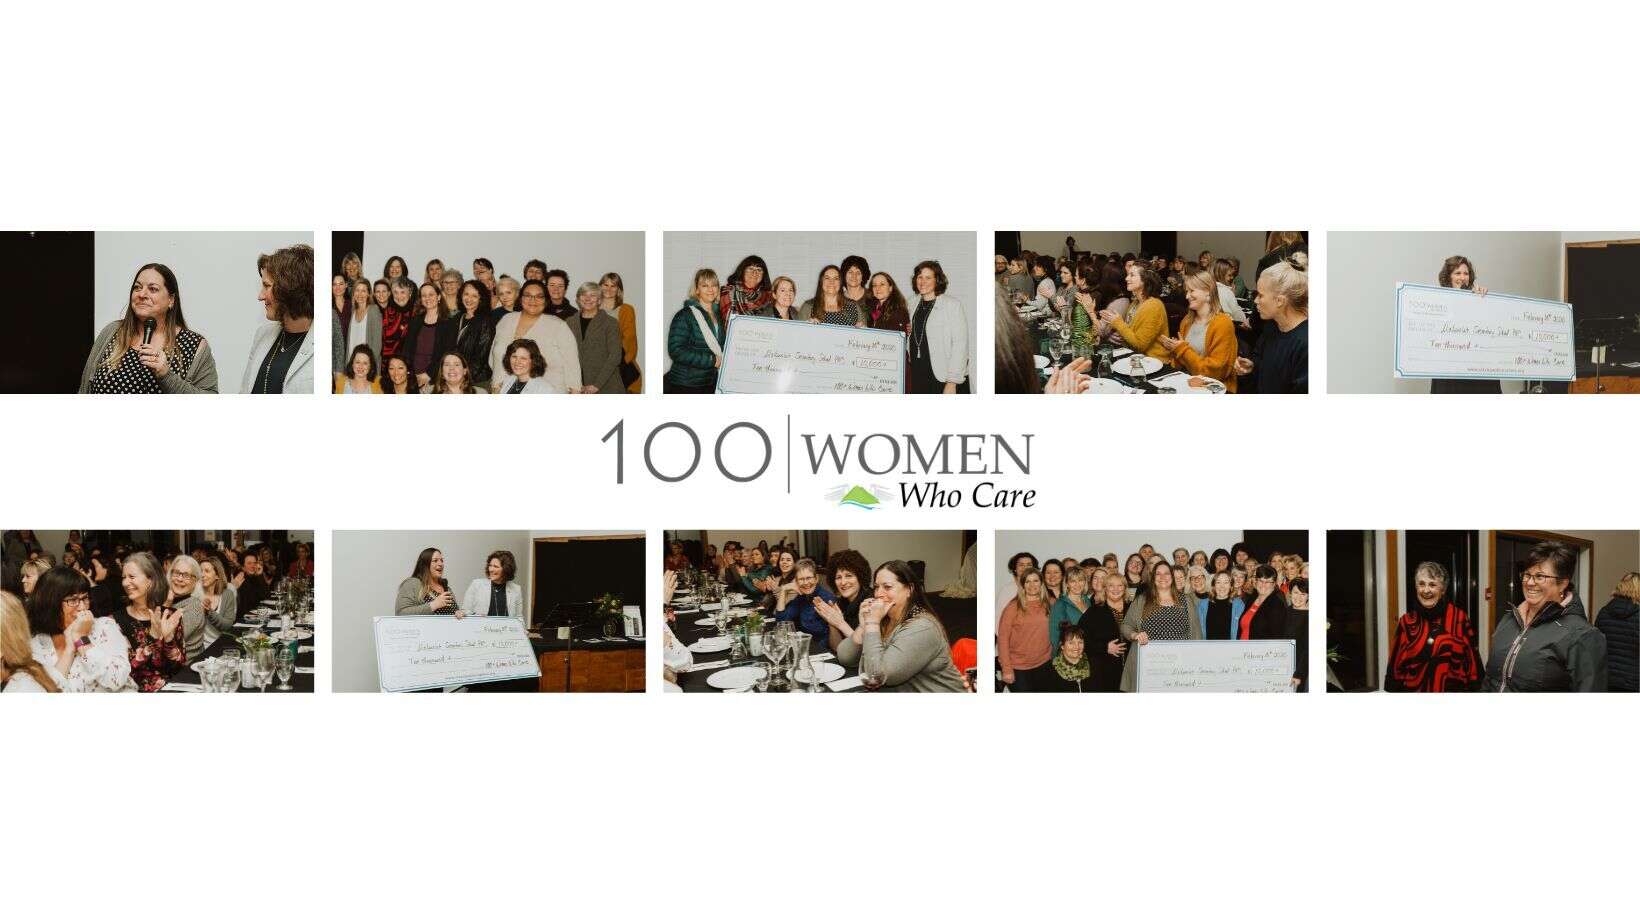 100 Women Who Care Event Clayoquot Biosphere Trust